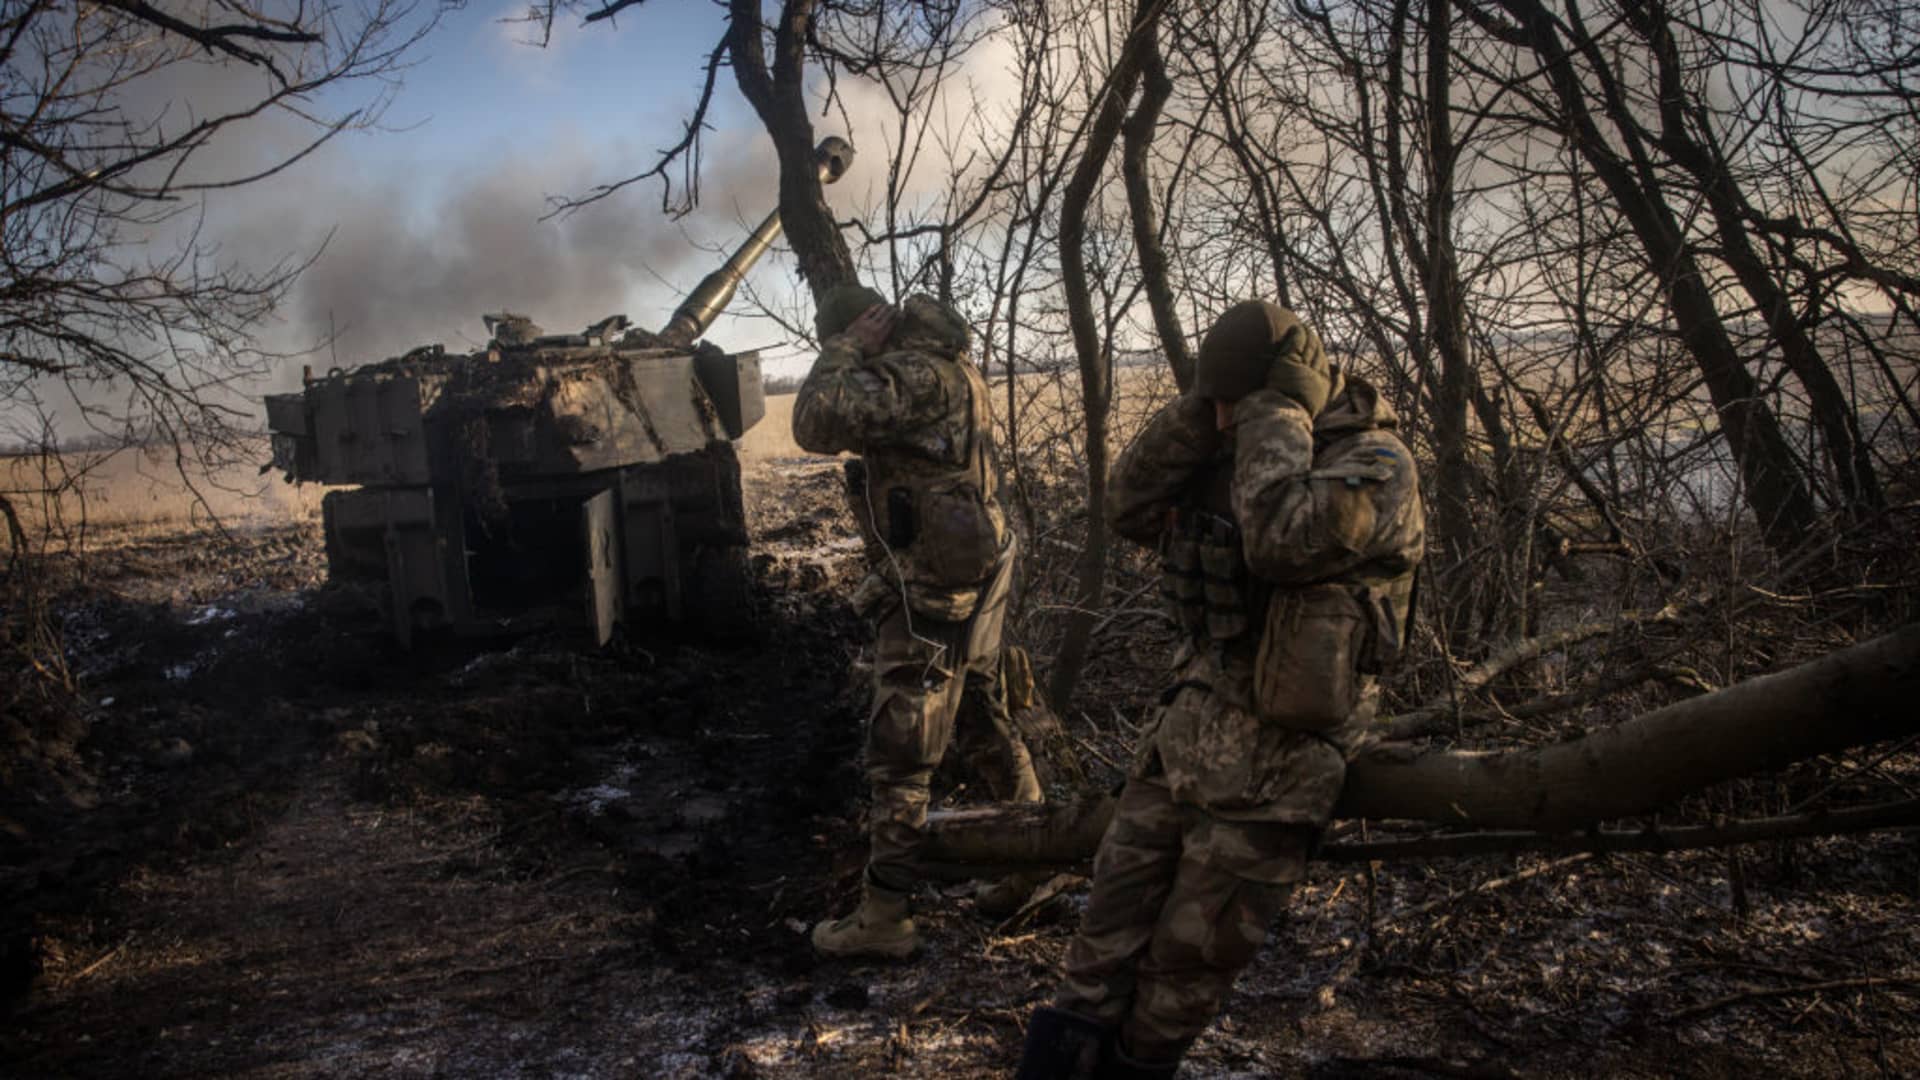 Members of a Ukrainian artillery unit cover their ears as an M109 self-propelled artillery unit is fired at Russian mortar positions around Vuhledar from a front line position on Dec. 19, 2022 in Donetsk, Ukraine.